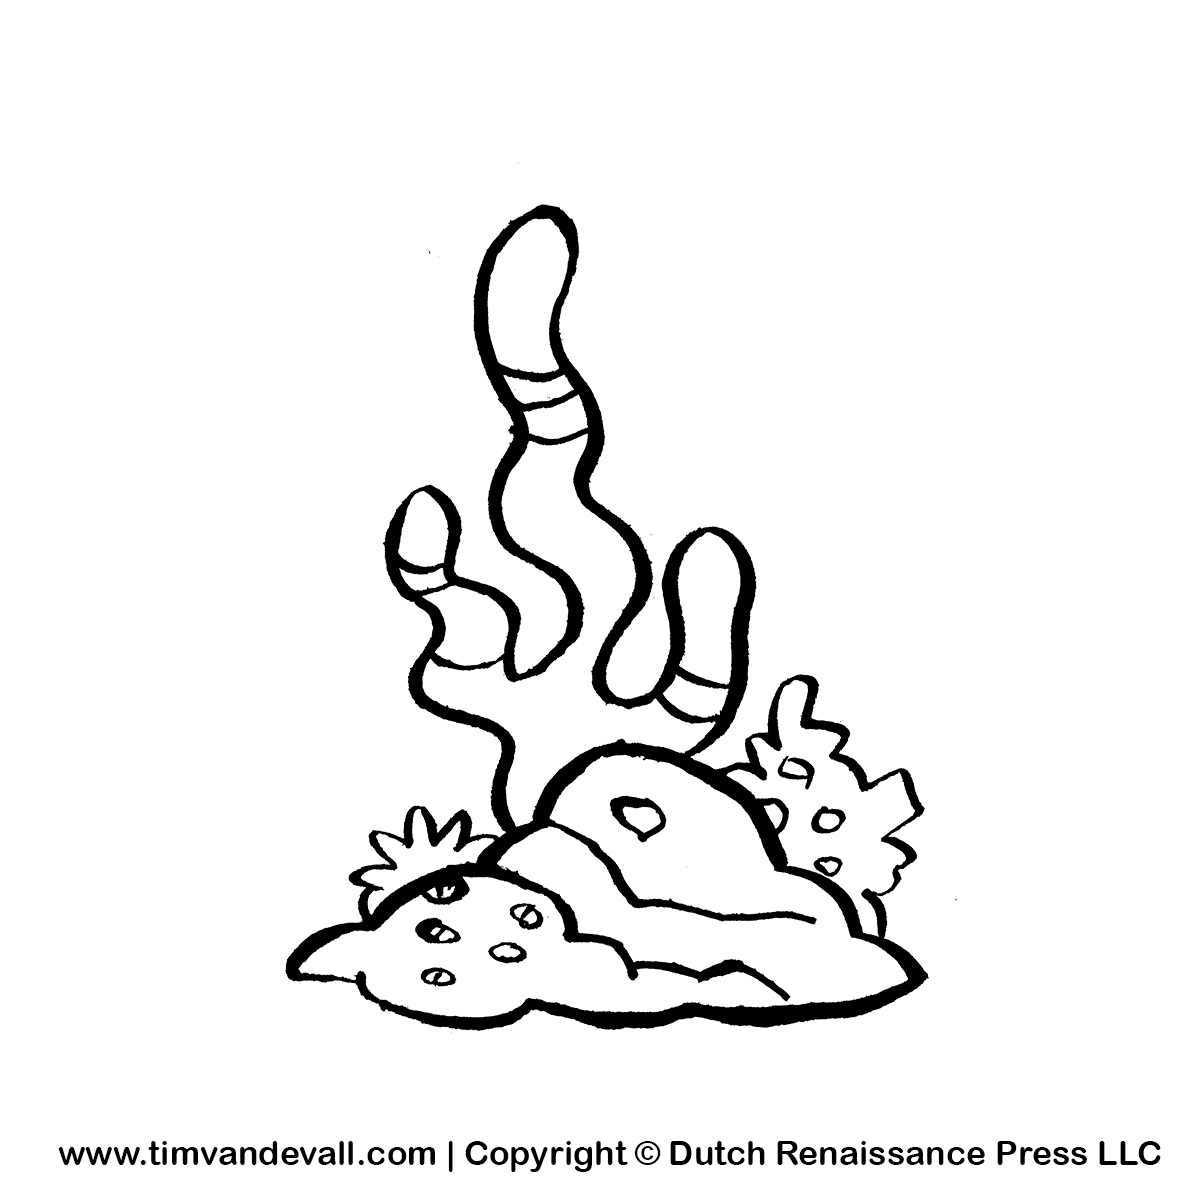 Coral clipart #13, Download drawings